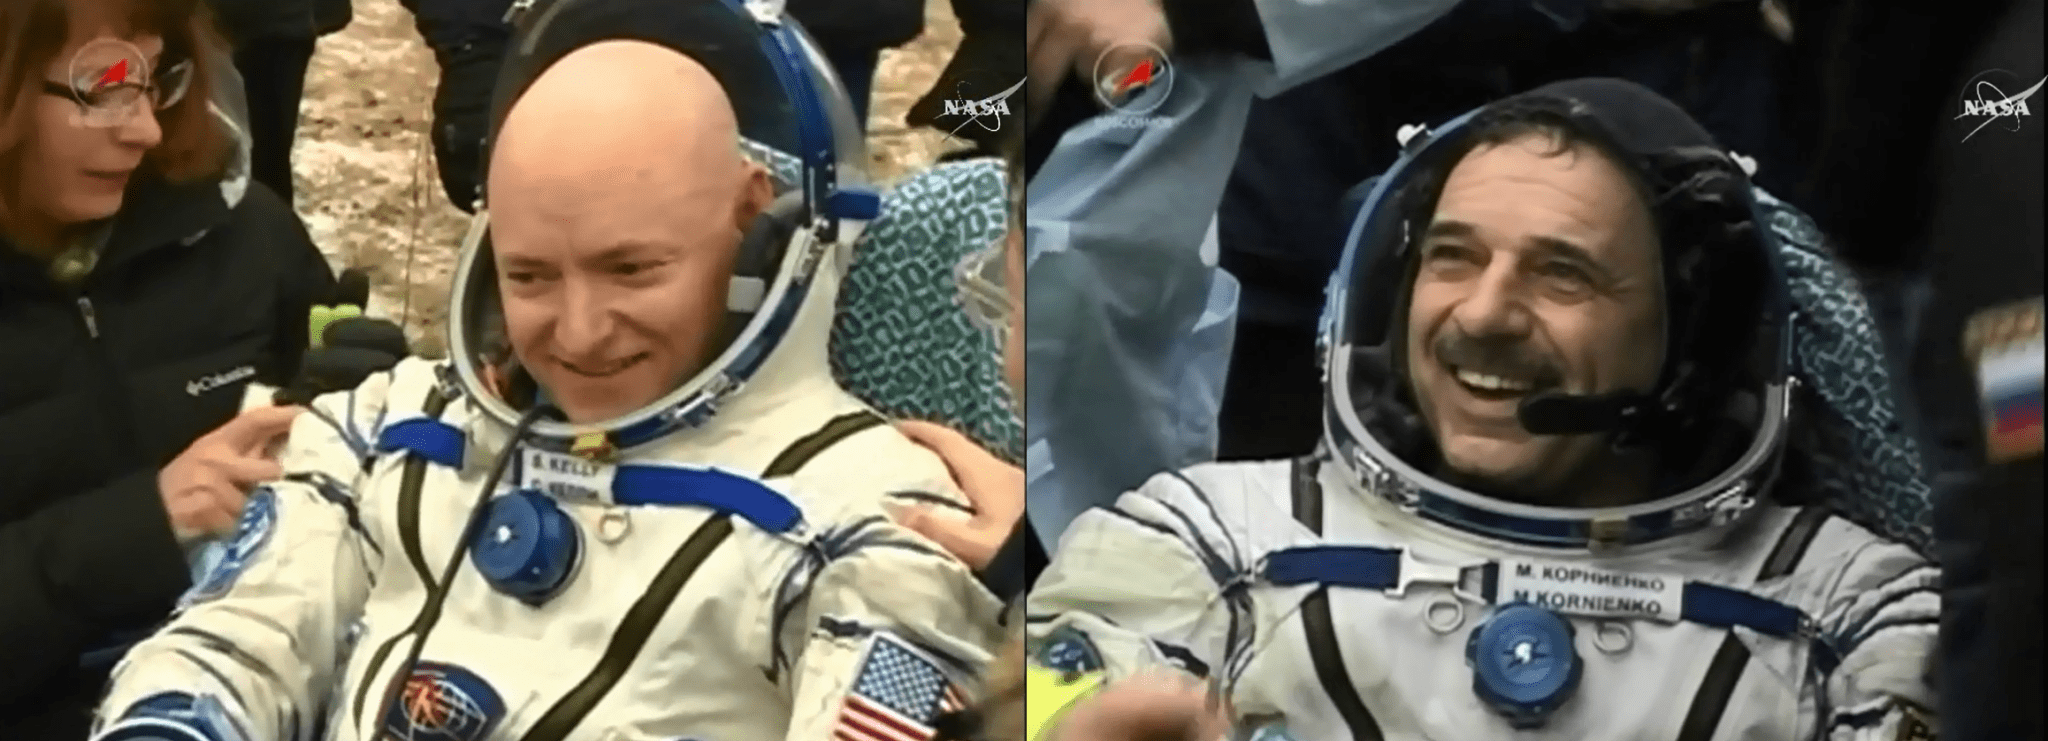 NASA astronaut and Expedition 46 Commander Scott Kelly and his Russian counterpart Mikhail Kornienko